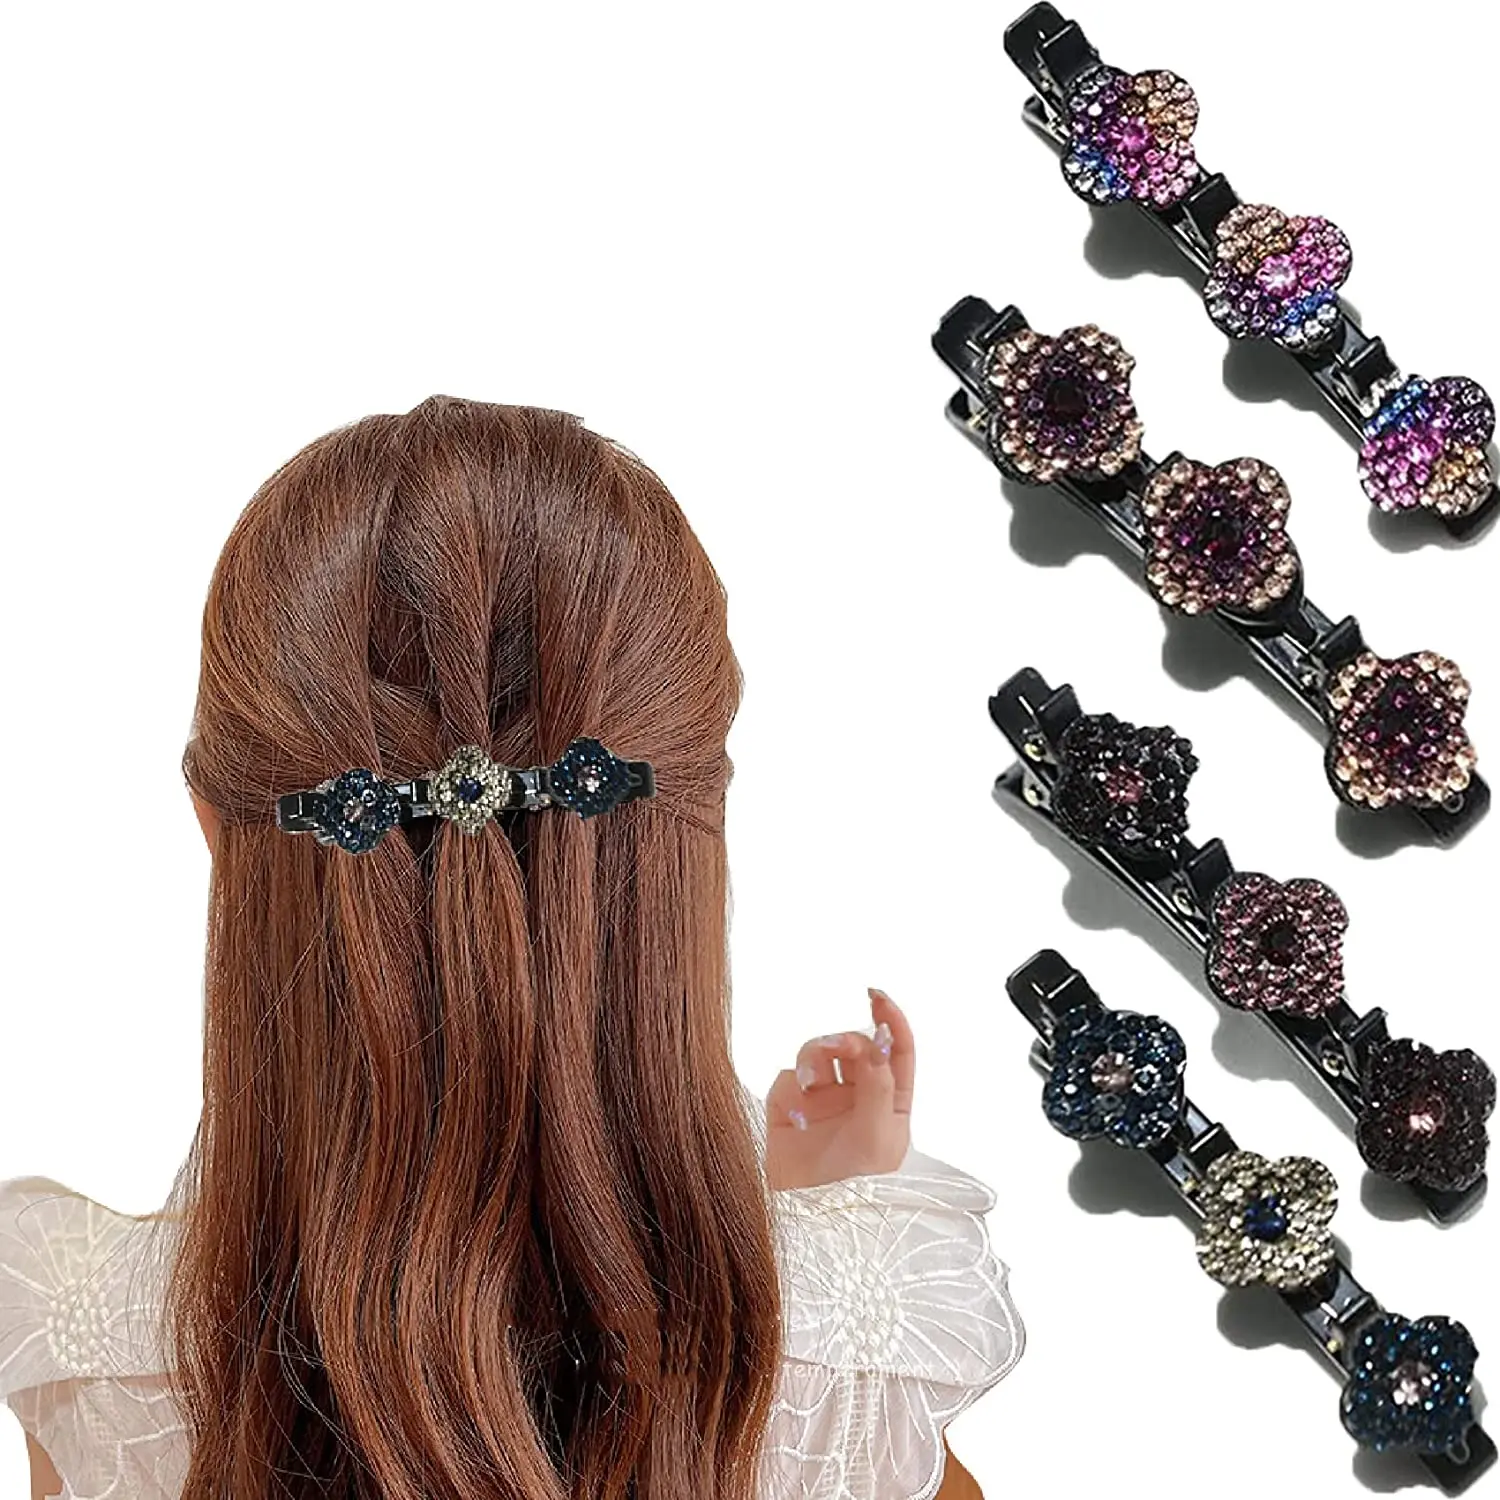 Sparkling Crystal Stone Braided Hair Clips, Satin Fabric Hair Bands, Rhinestone Hair Clips, Braided Hair Clip with Rhinestones doremi crystal hollow name bangle with stone bar bracelet custom name personalized bracelets rhinestone for actual pictures